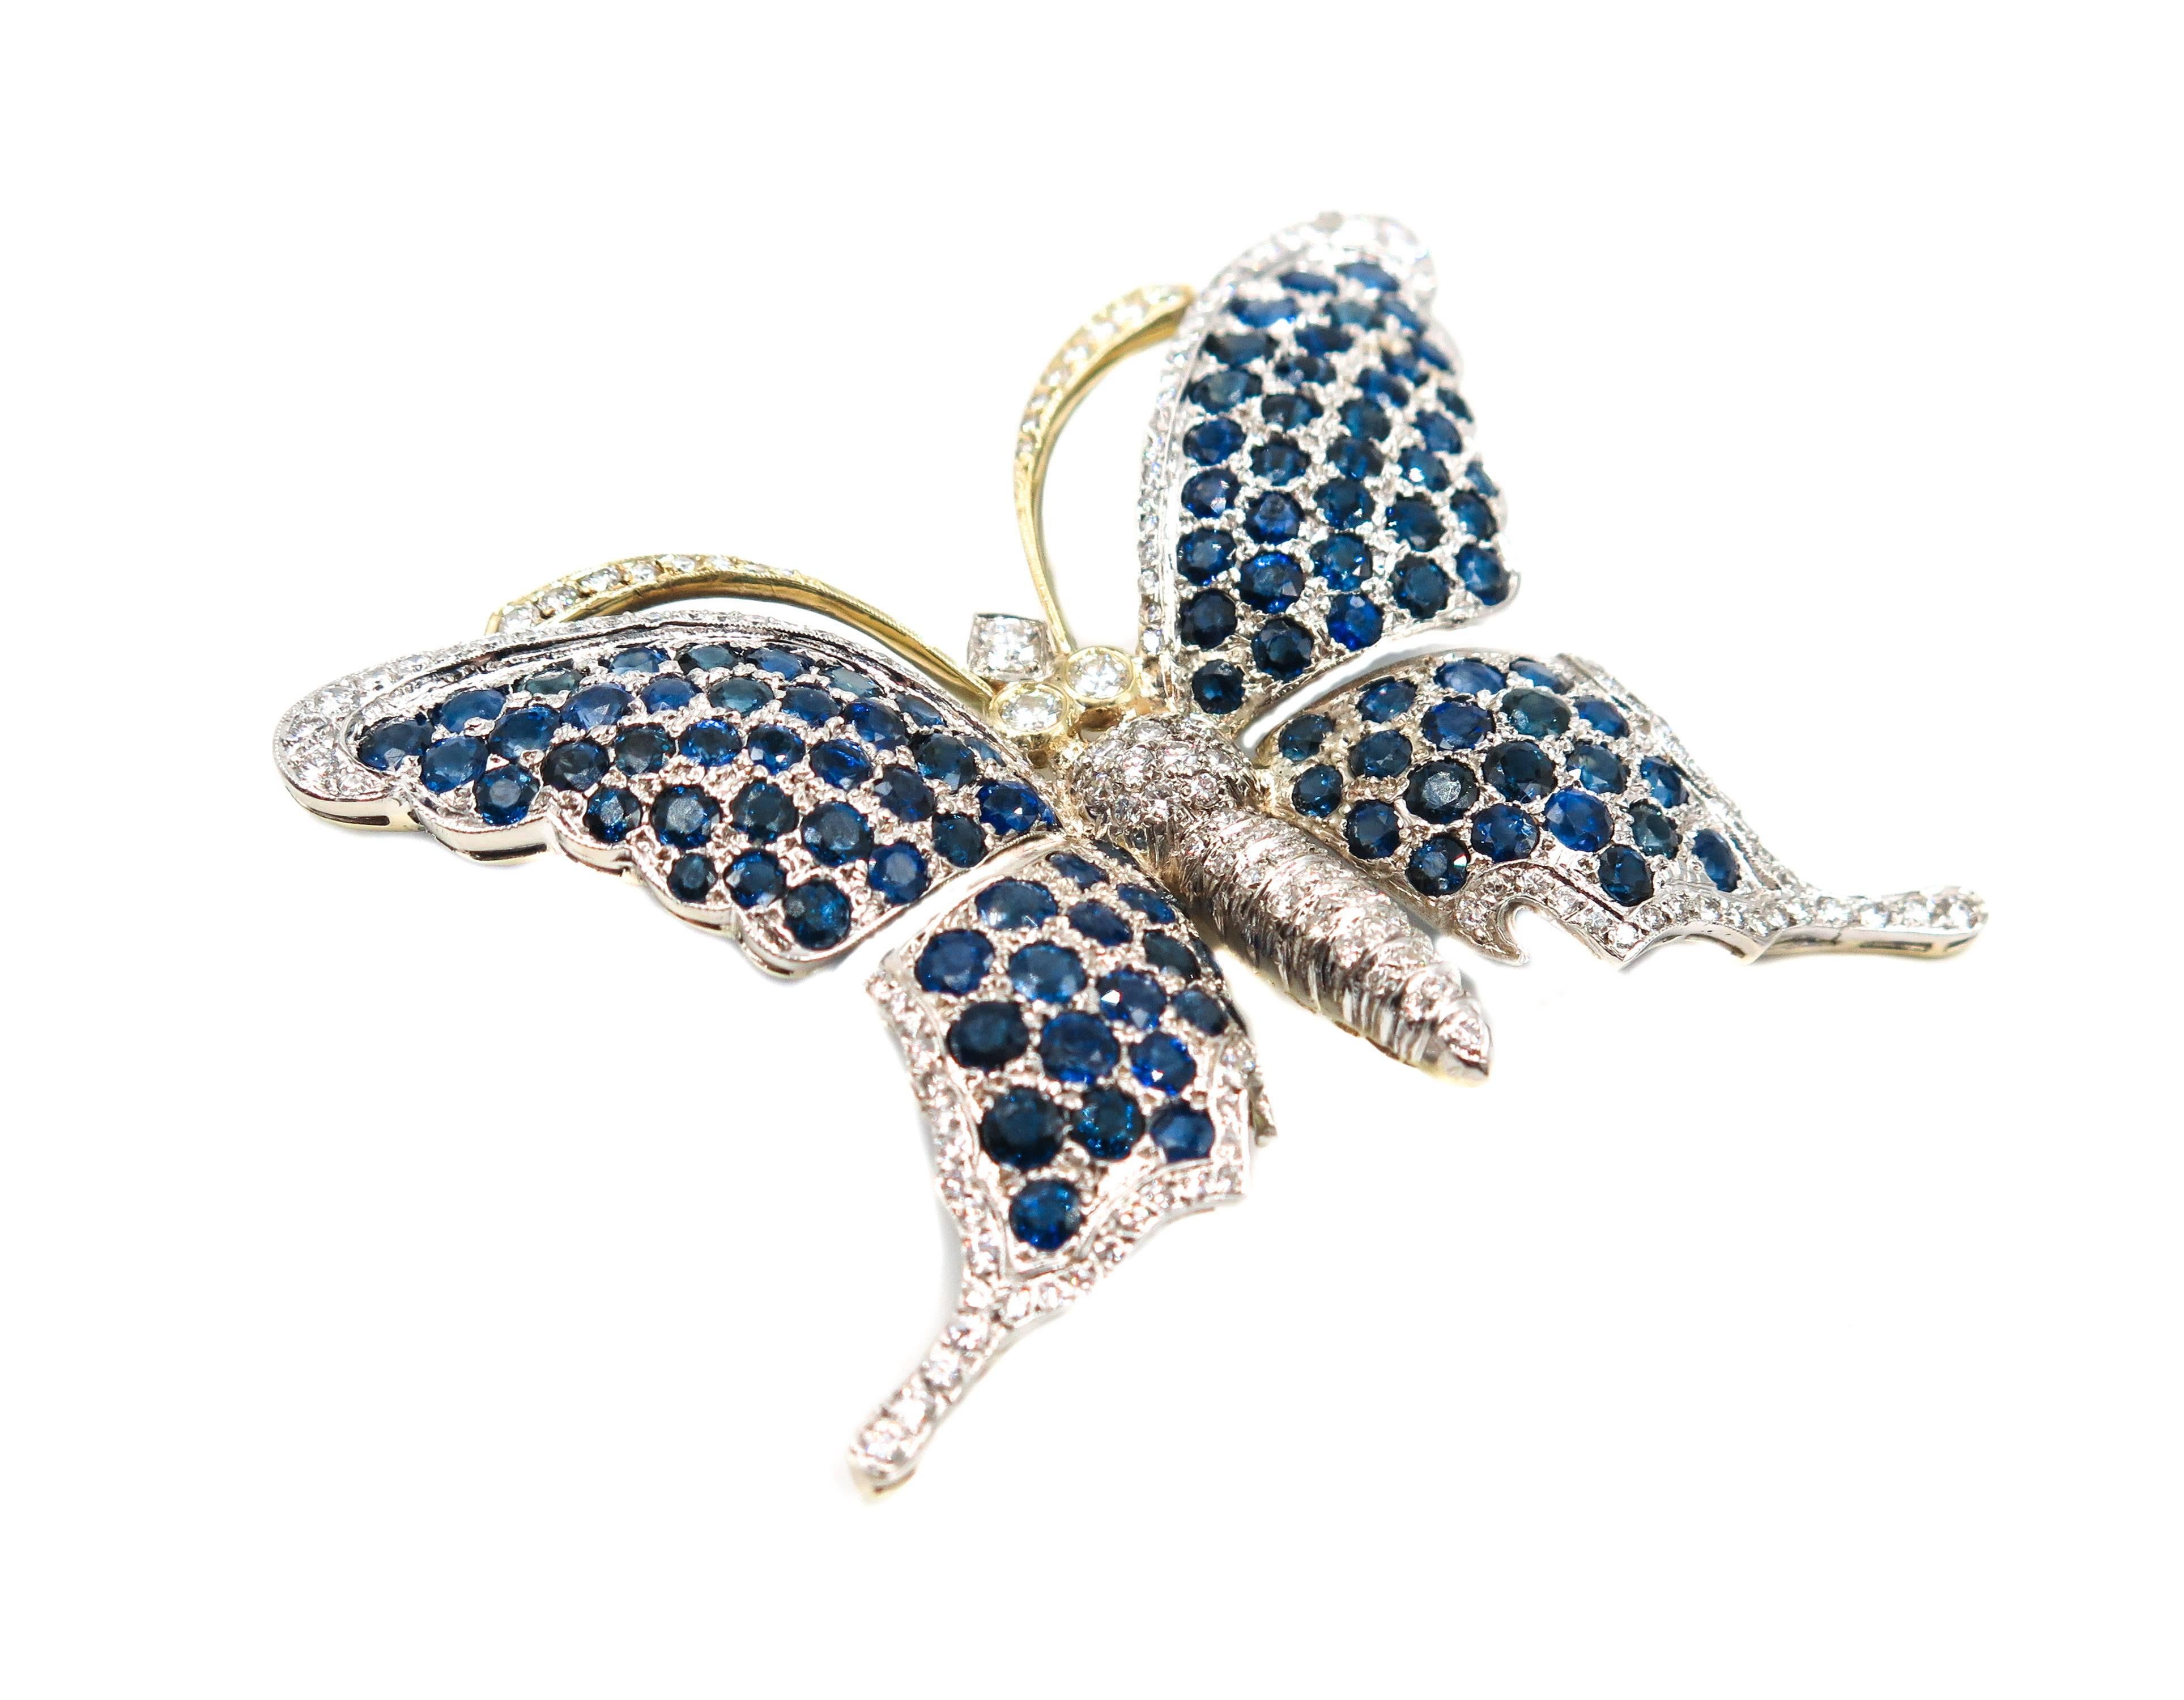 High fashion, glamour, seduction and beauty are just some of the ingredients in the mix, creating a unique jewel inspired by luxury and the pursuit of beauty. 
This sapphire and diamond butterfly brooch is shaped by the image of the sophisticated